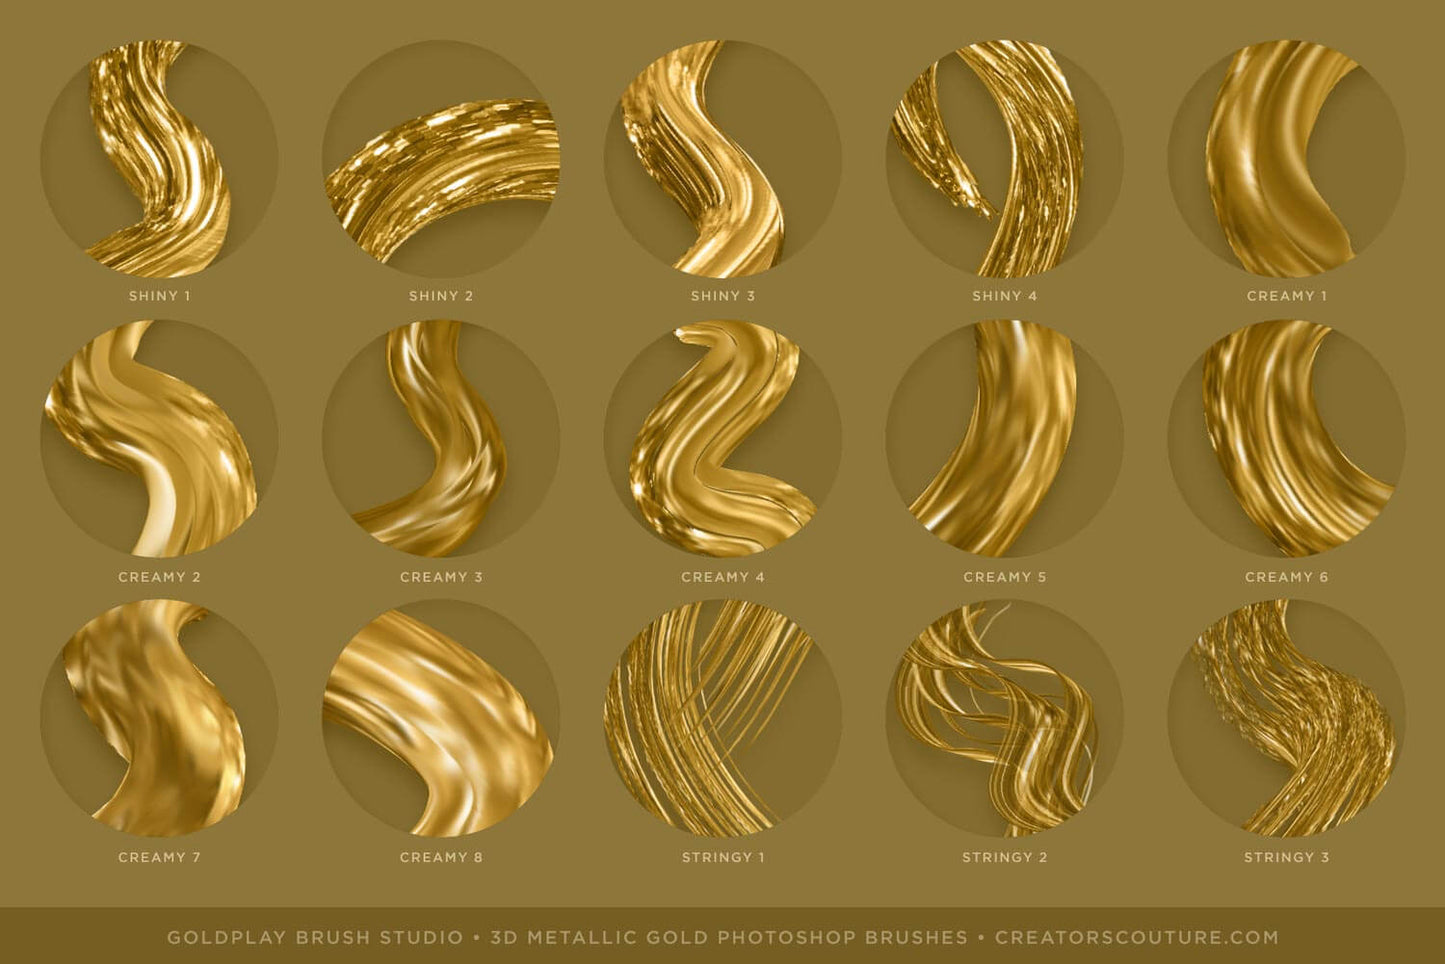 3d metallic gold photoshop effects chart 2 - Photoshop brush strokes that resemble 3d gold chains, liquid gold, & dimensional metallic gold